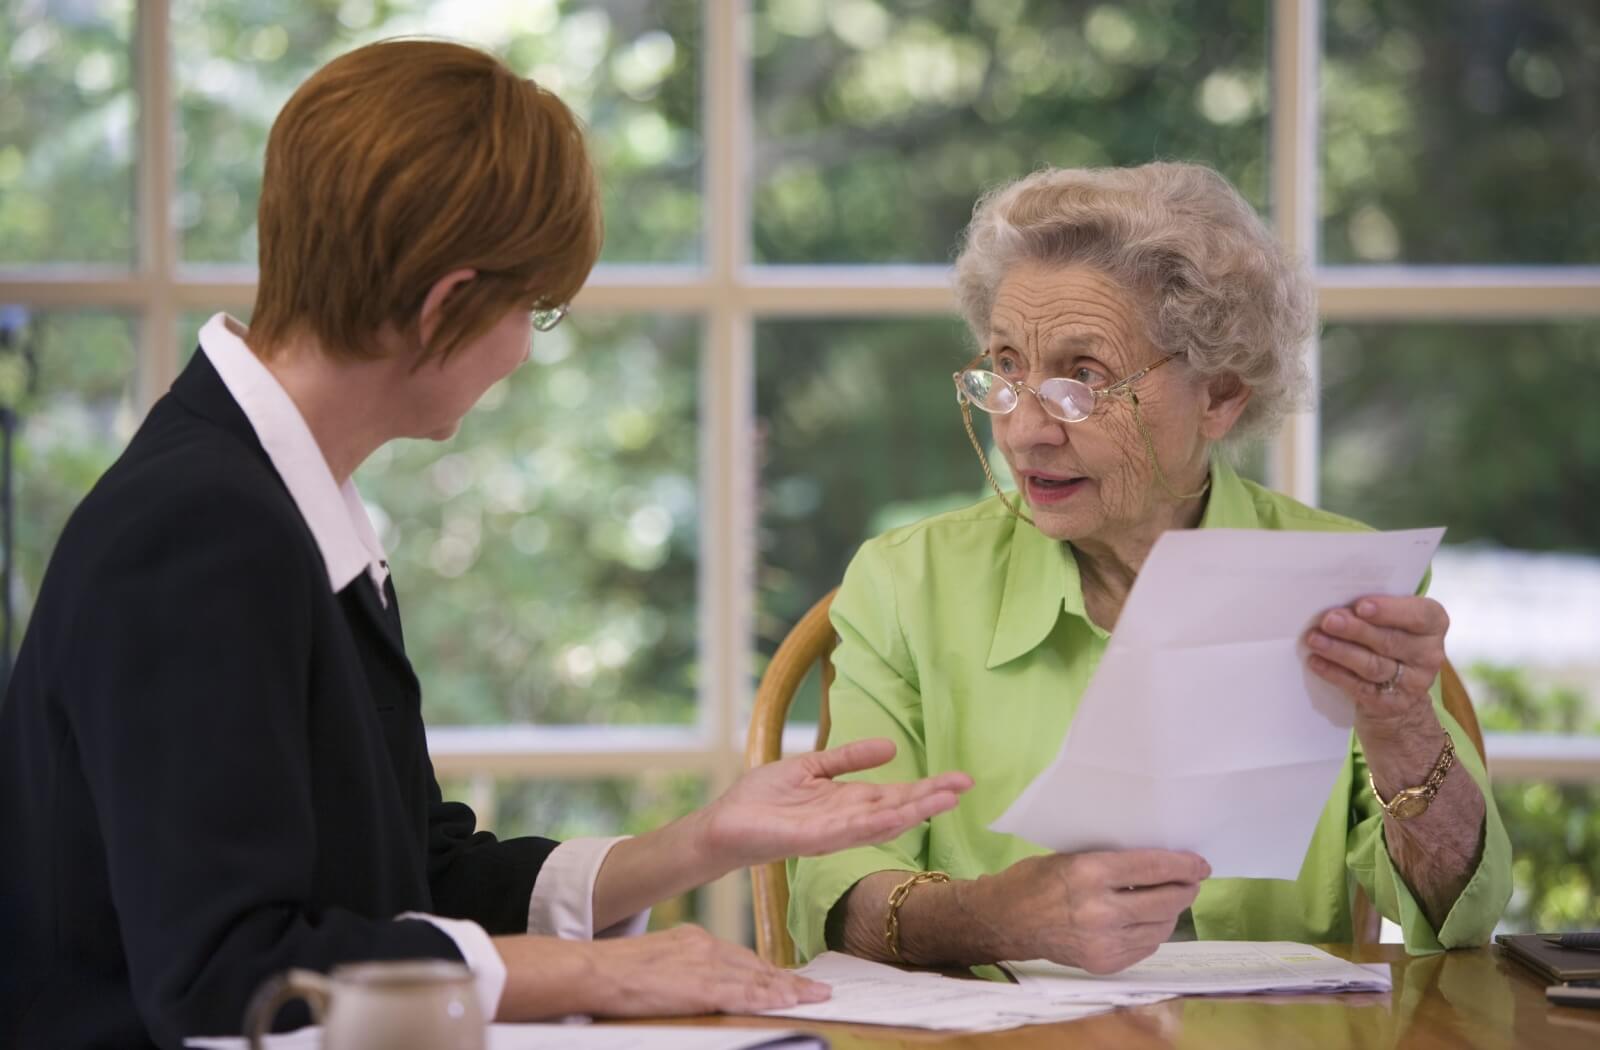 An older woman holds a piece of paper while his lawyer talks about what's written on it.